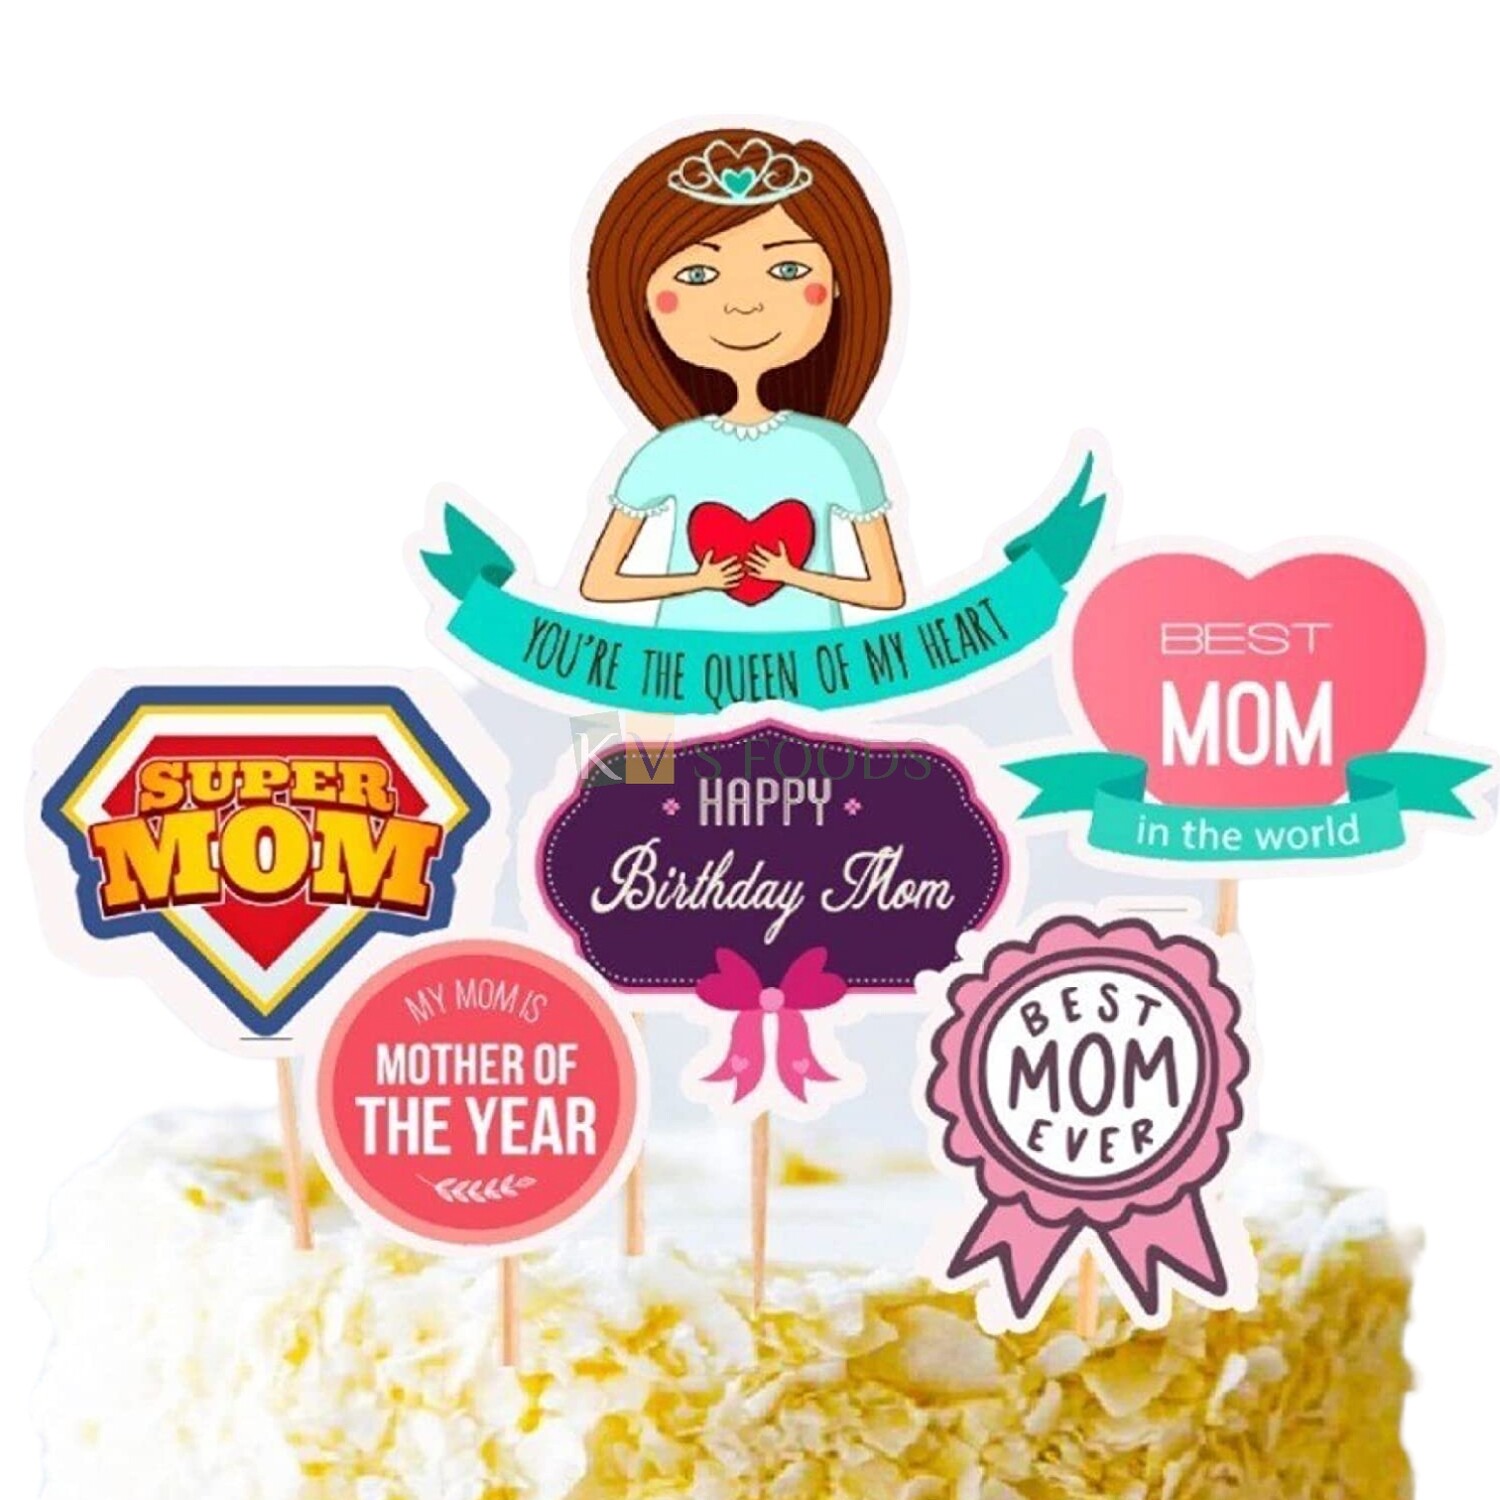 6 PC MOM Super Mom, Mother's Day Theme, Cake Topper Insert, Cake Topper, Cupcake Toppers Bday, MoM, Bday Decorations Items/Cake Accessories, Tags, Cards, Cake Toothpick Topper